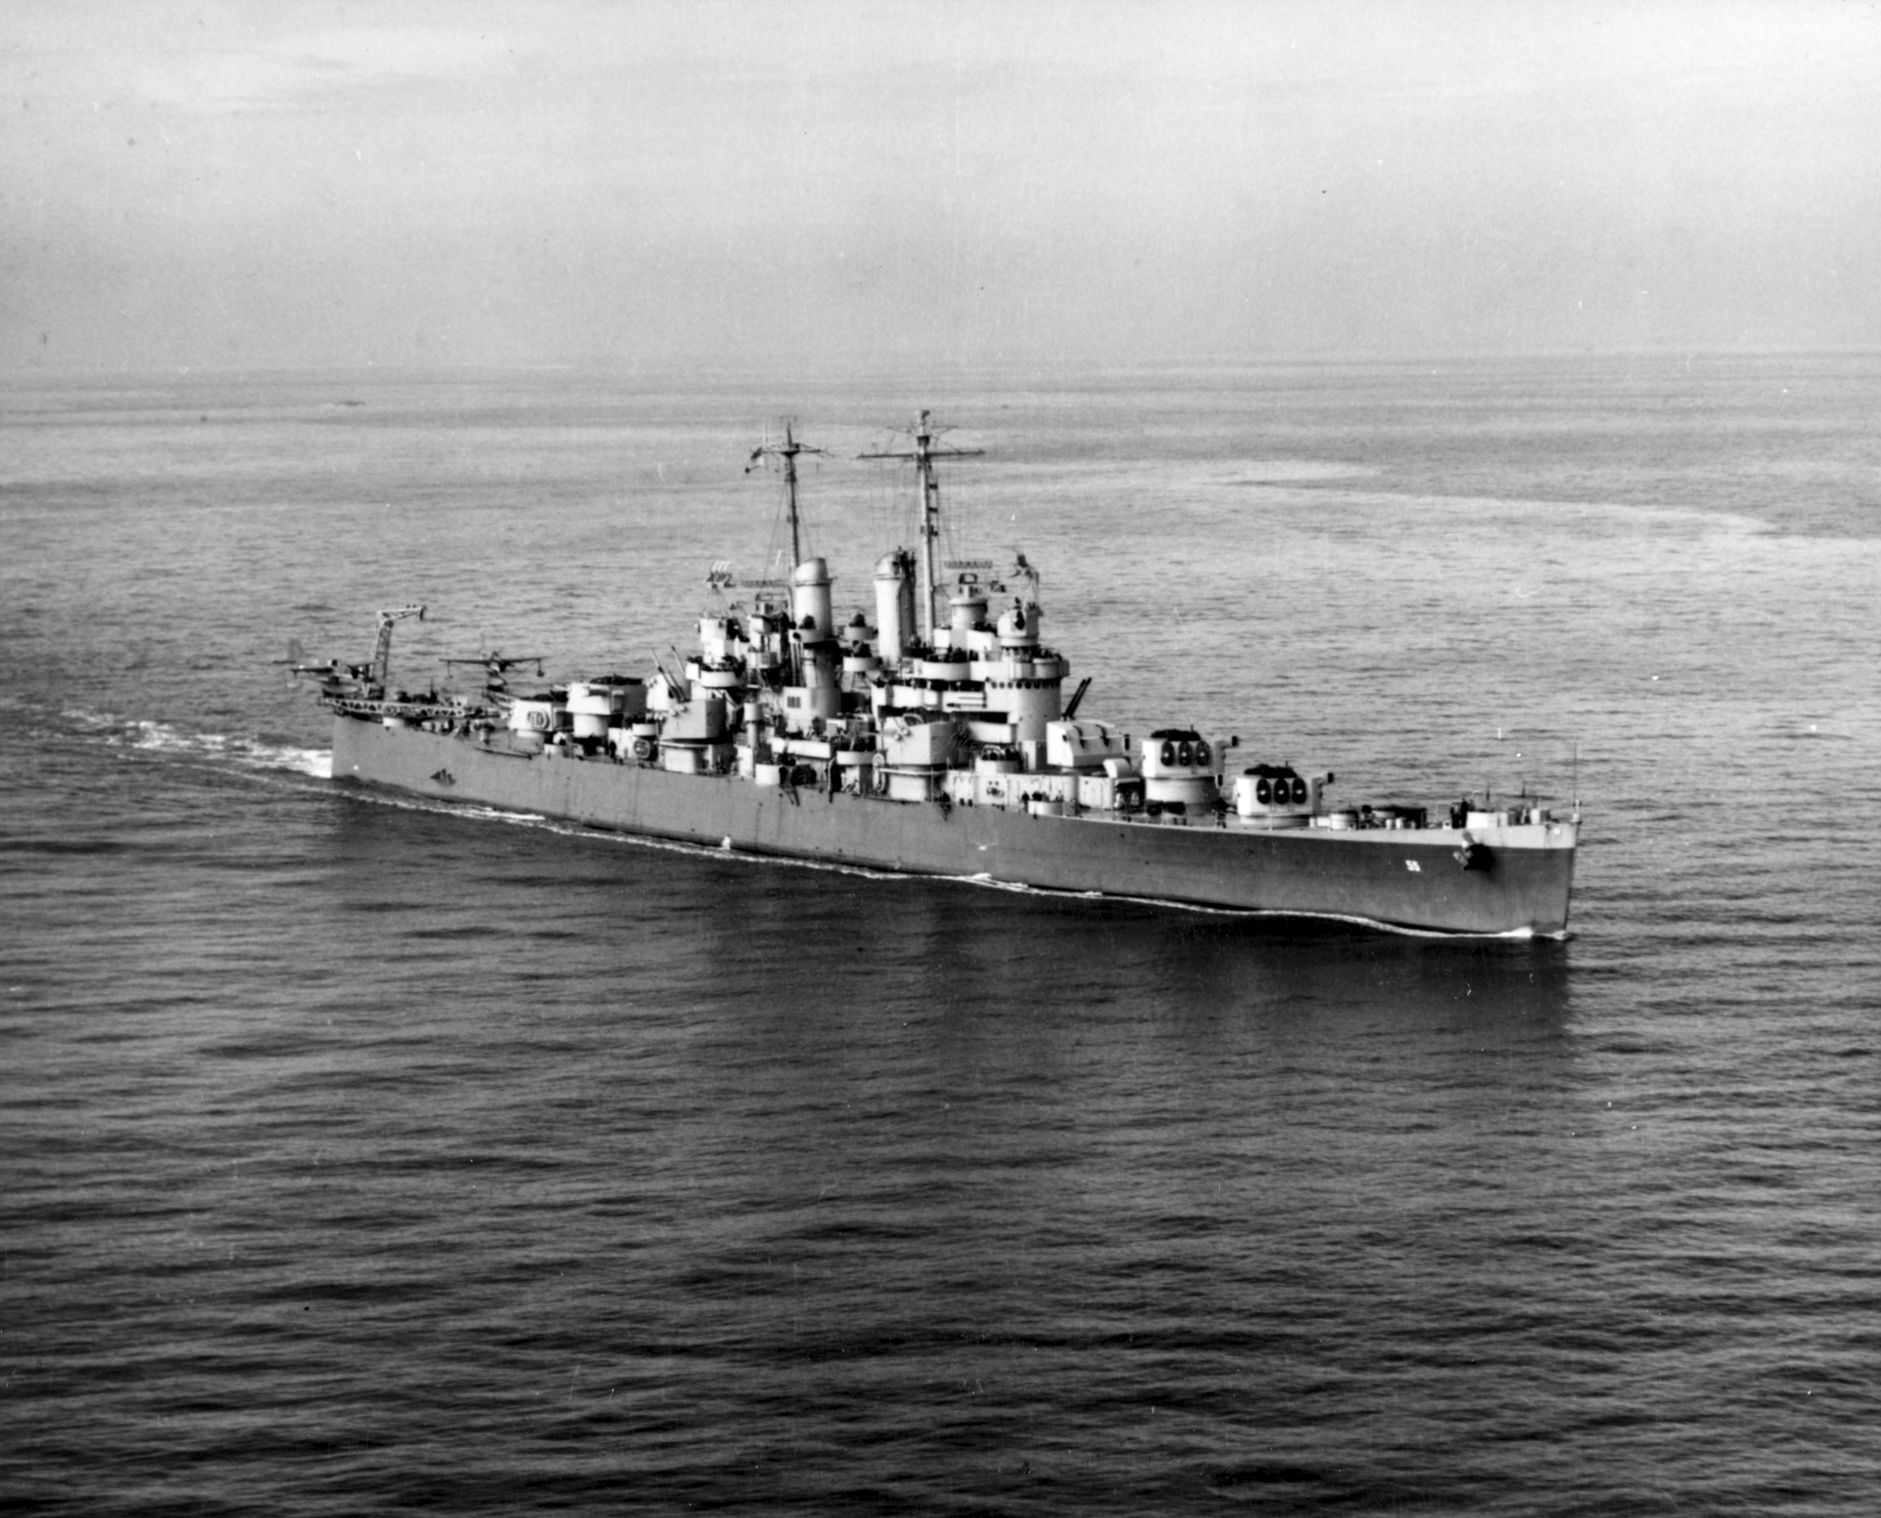 The light cruiser USS Cleveland, shown underway in 1942, was the lead ship of her class mounting 6-inch main guns. 